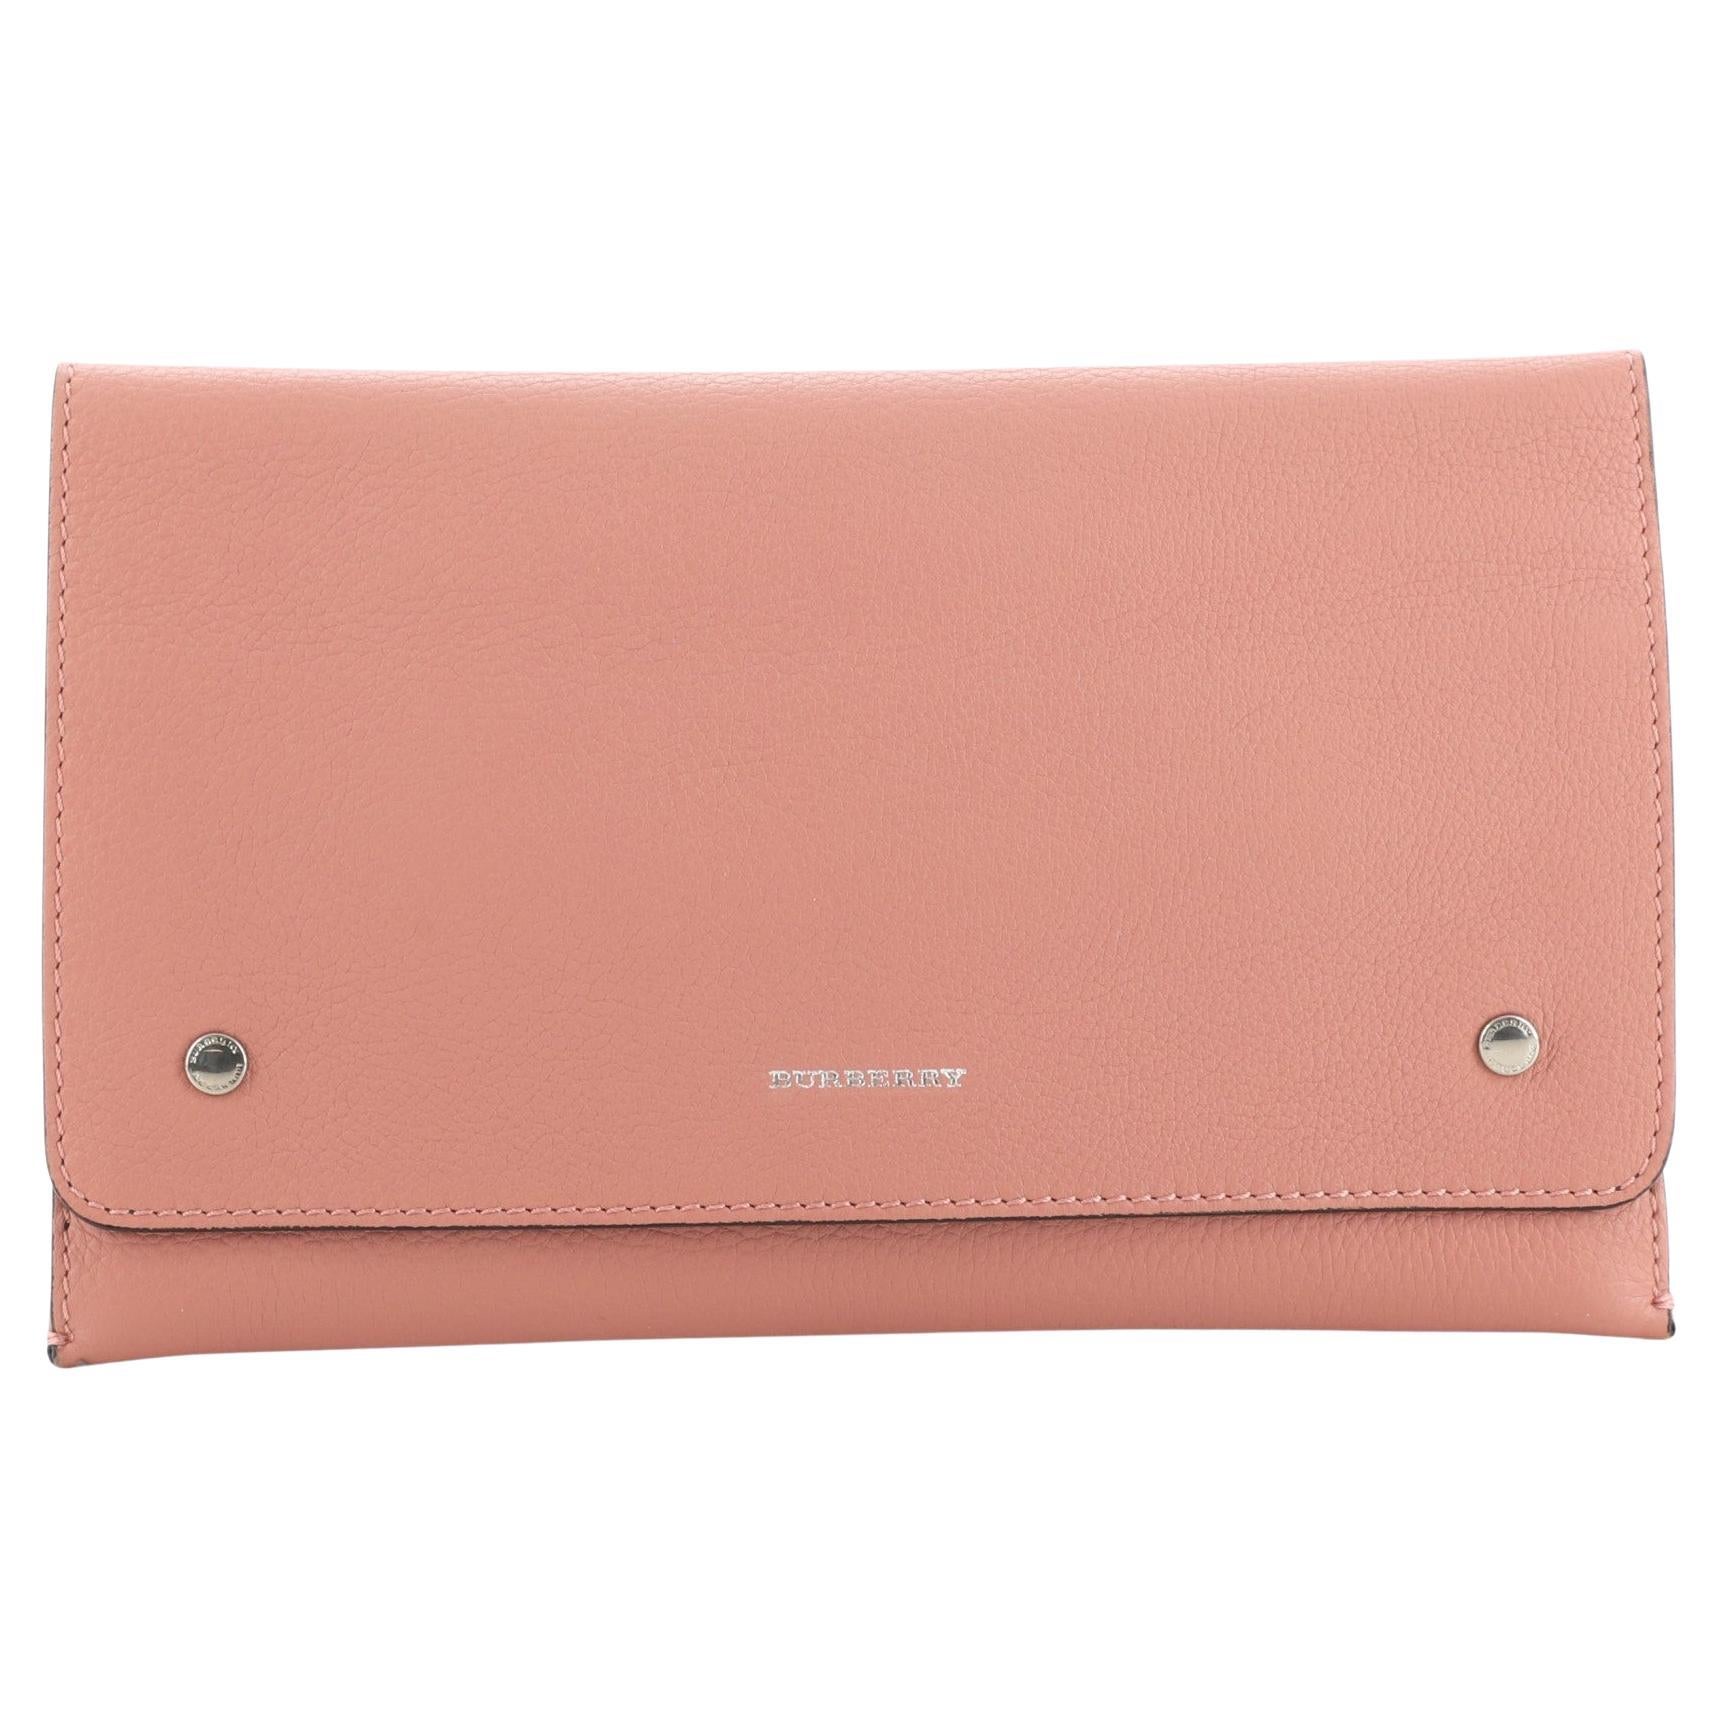 Burberry Pearson Clutch Leather